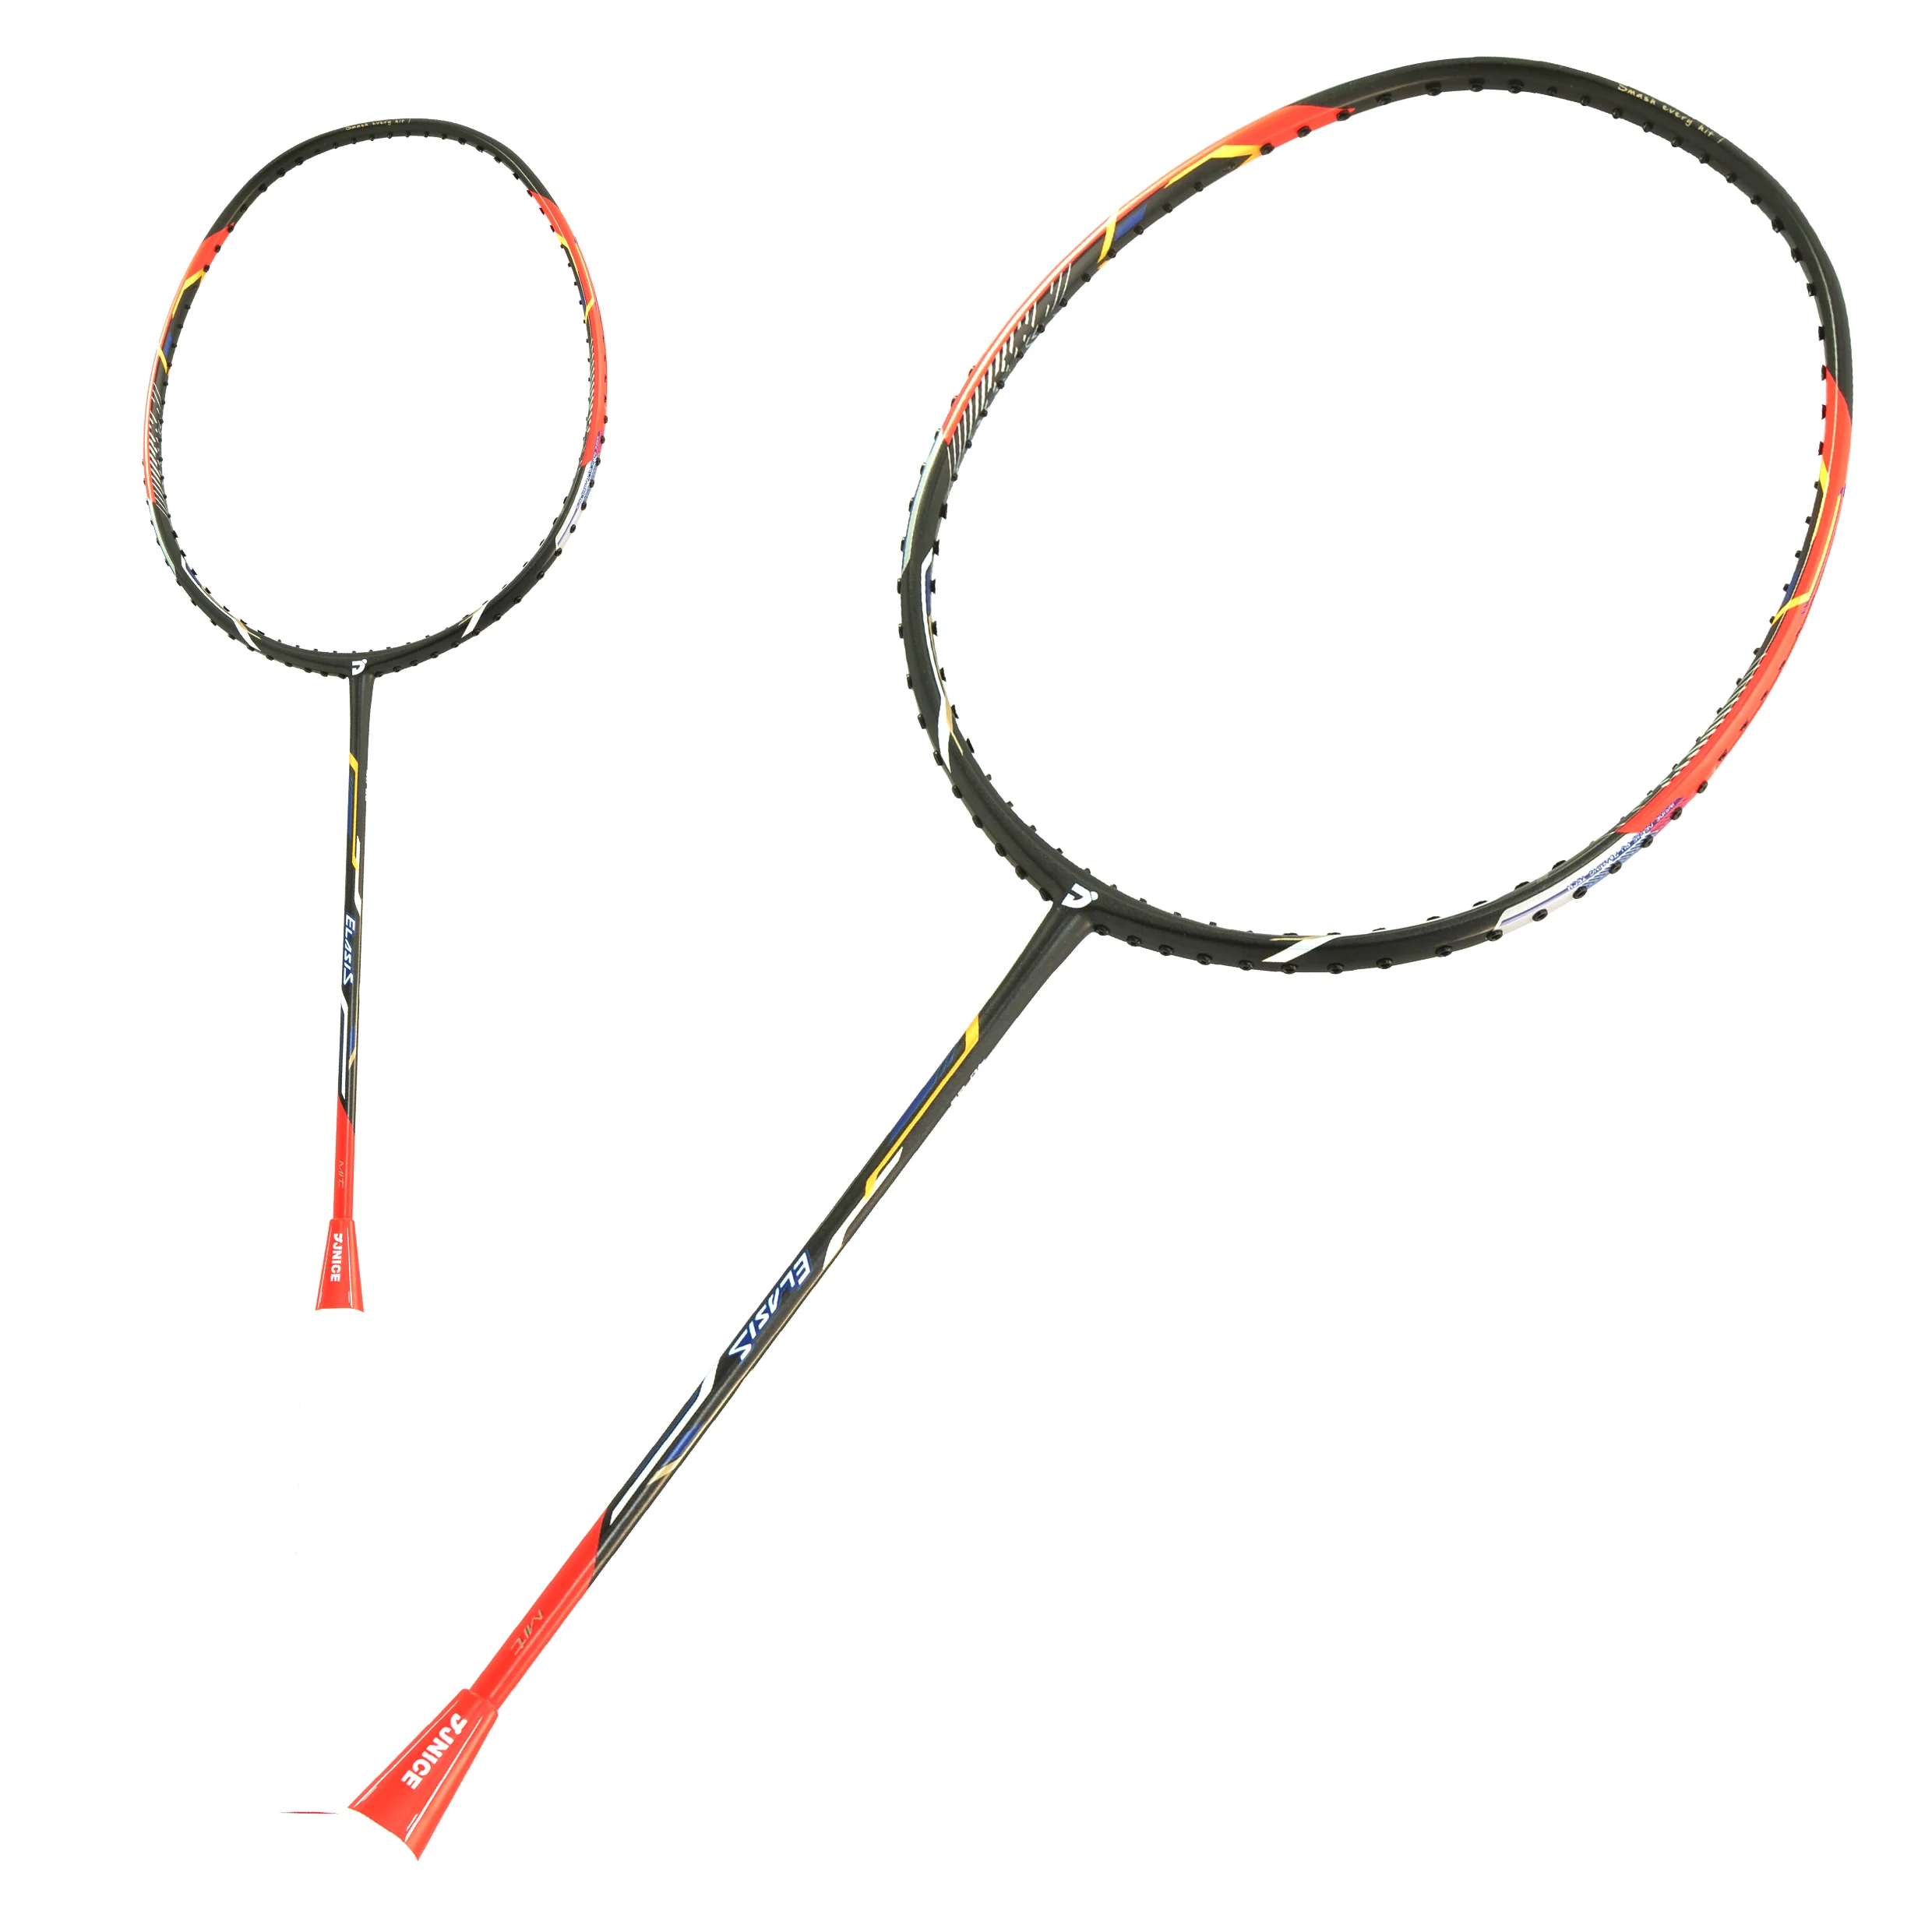 Wholesale Taiwan best red color top badminton original racquets From m.alibaba